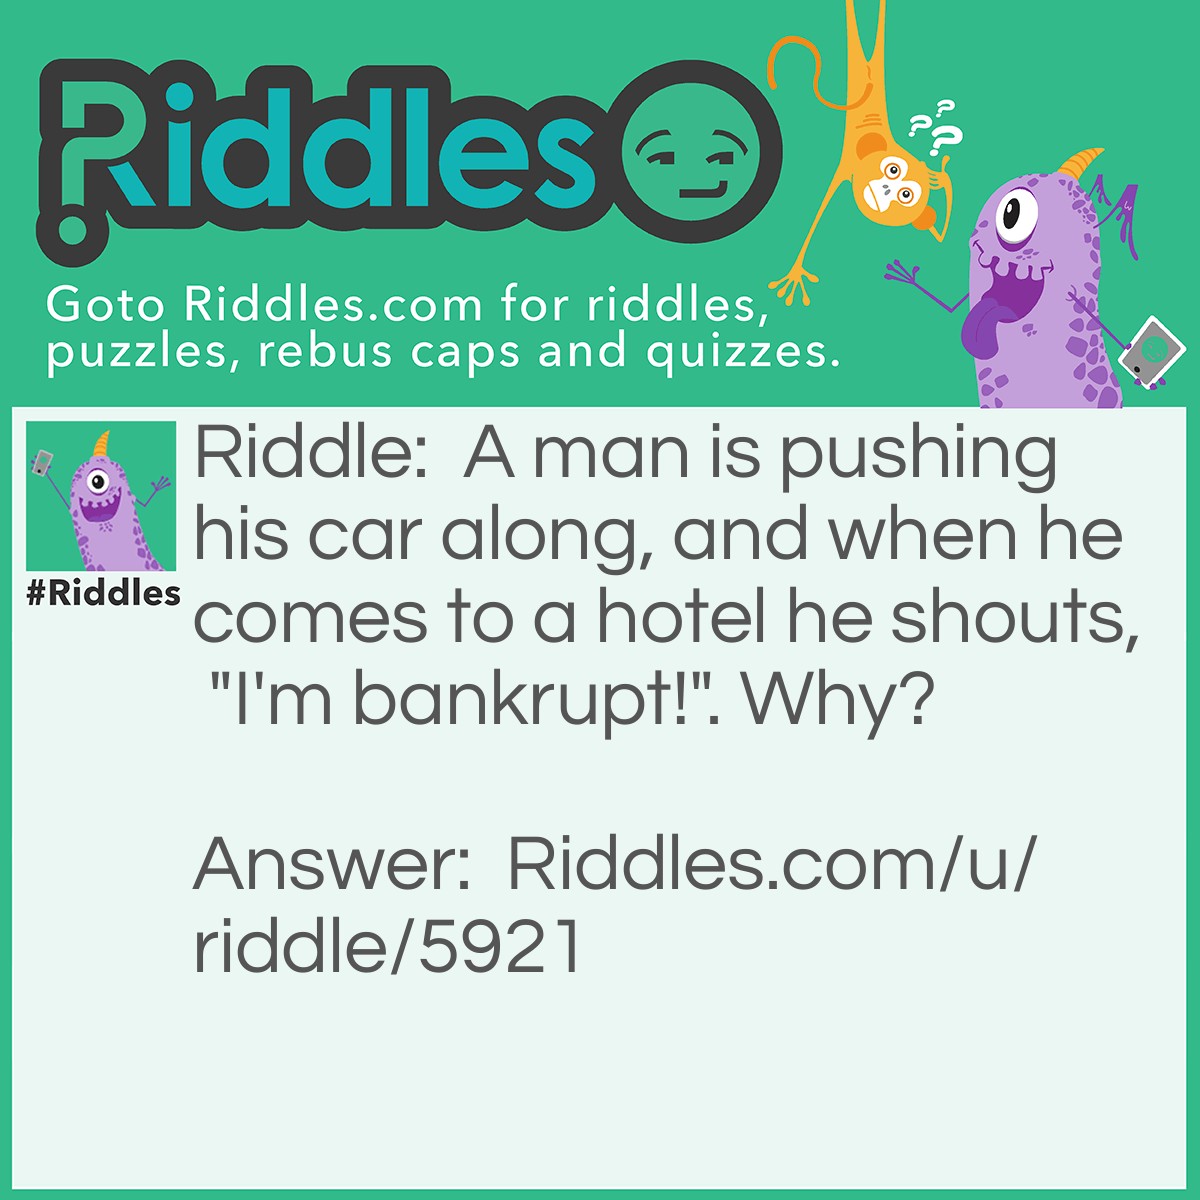 Riddle: A man is pushing his car along, and when he comes to a hotel he shouts, "I'm bankrupt!". Why? Answer: He was playing Monopoly.